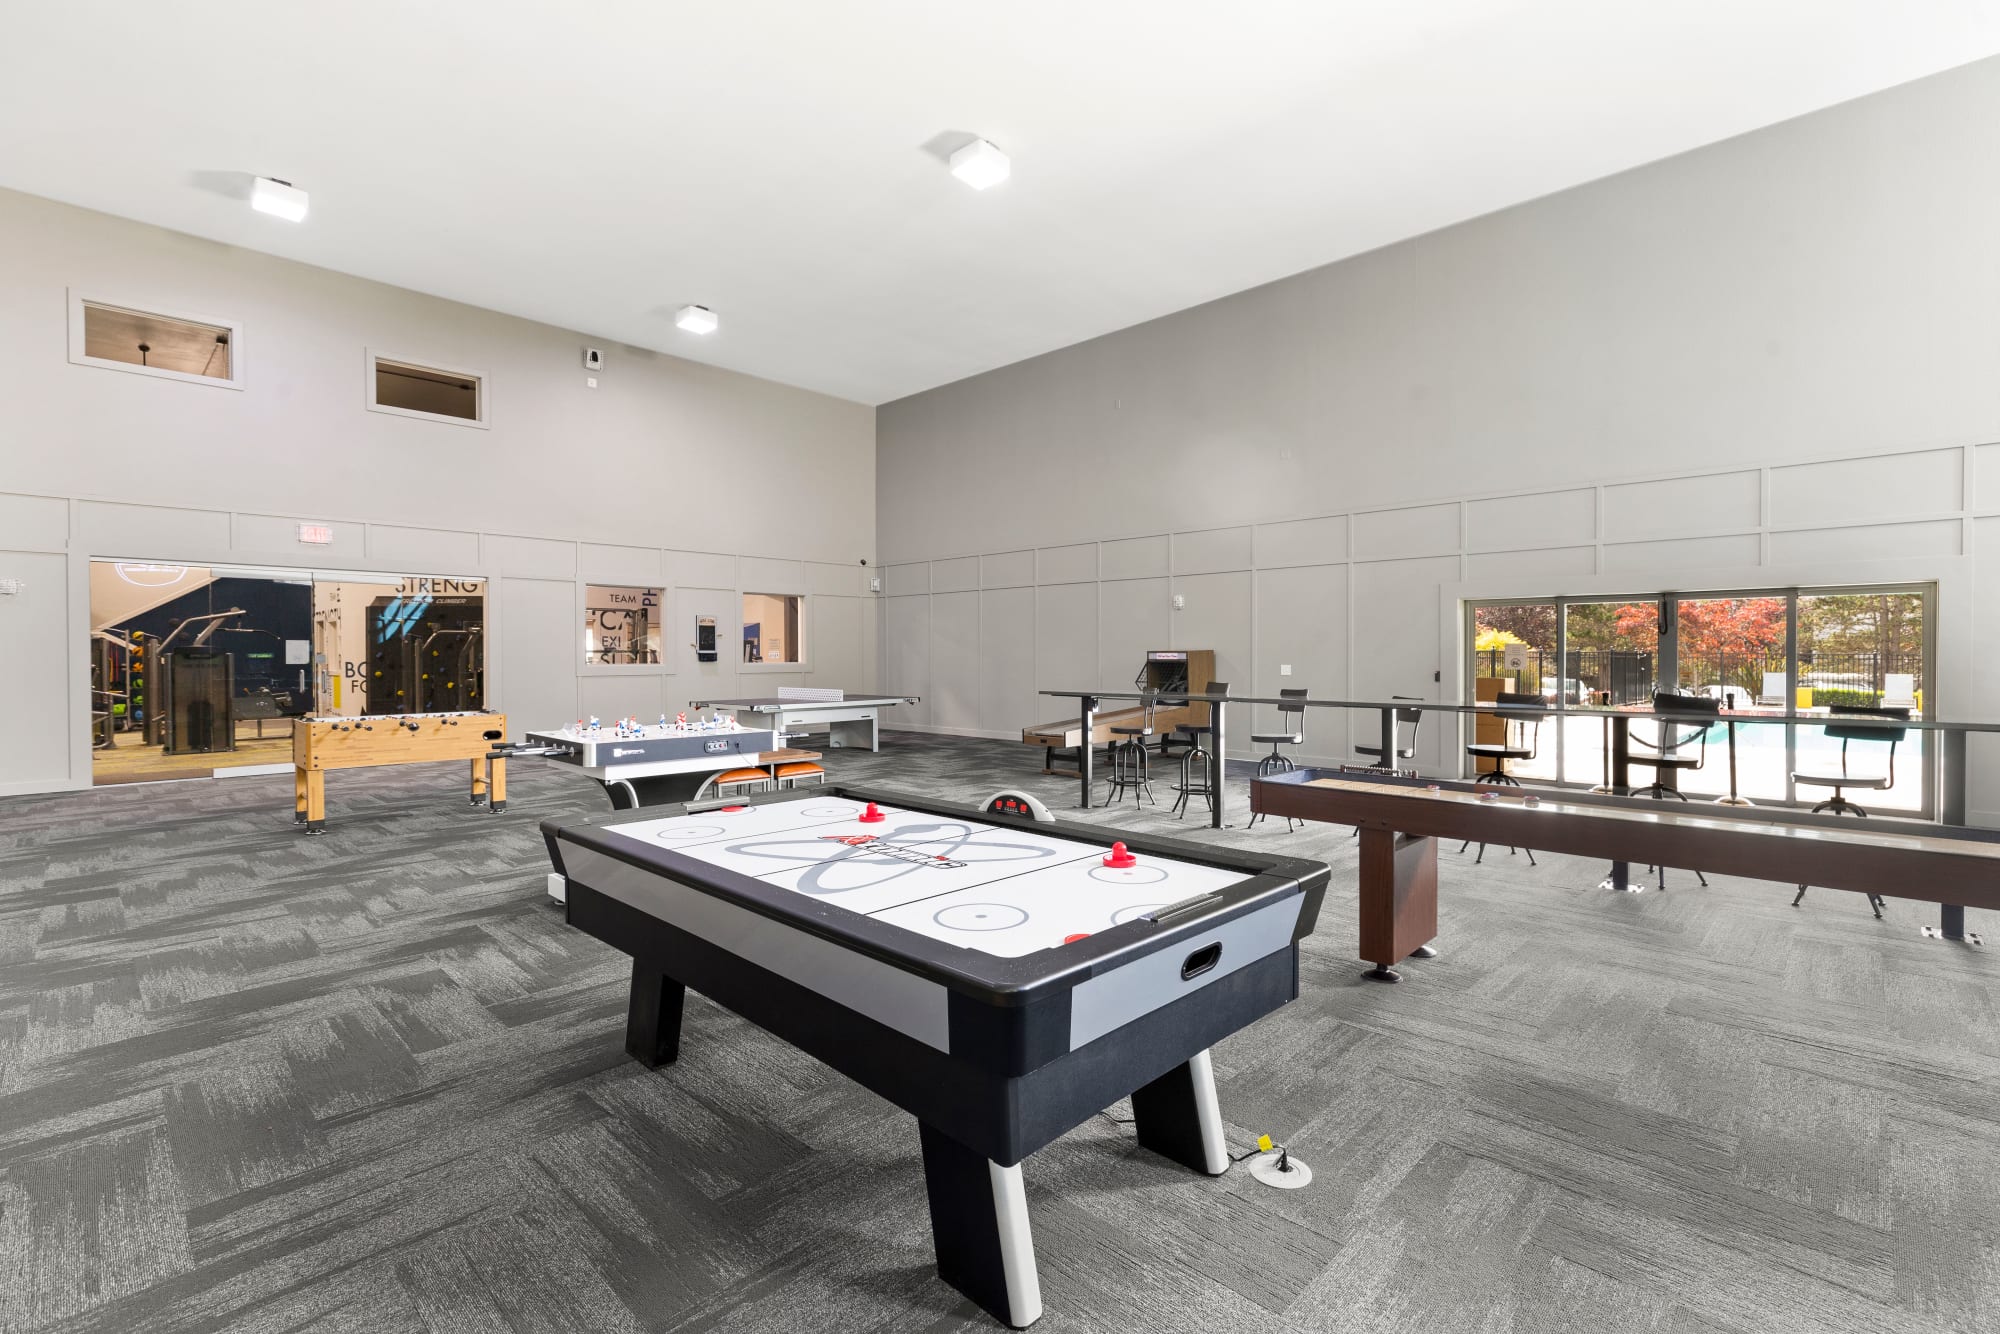 Game Room with Air Hockey, Shuffleboard, arcade games and more at Cascade Ridge in Silverdale, Washington